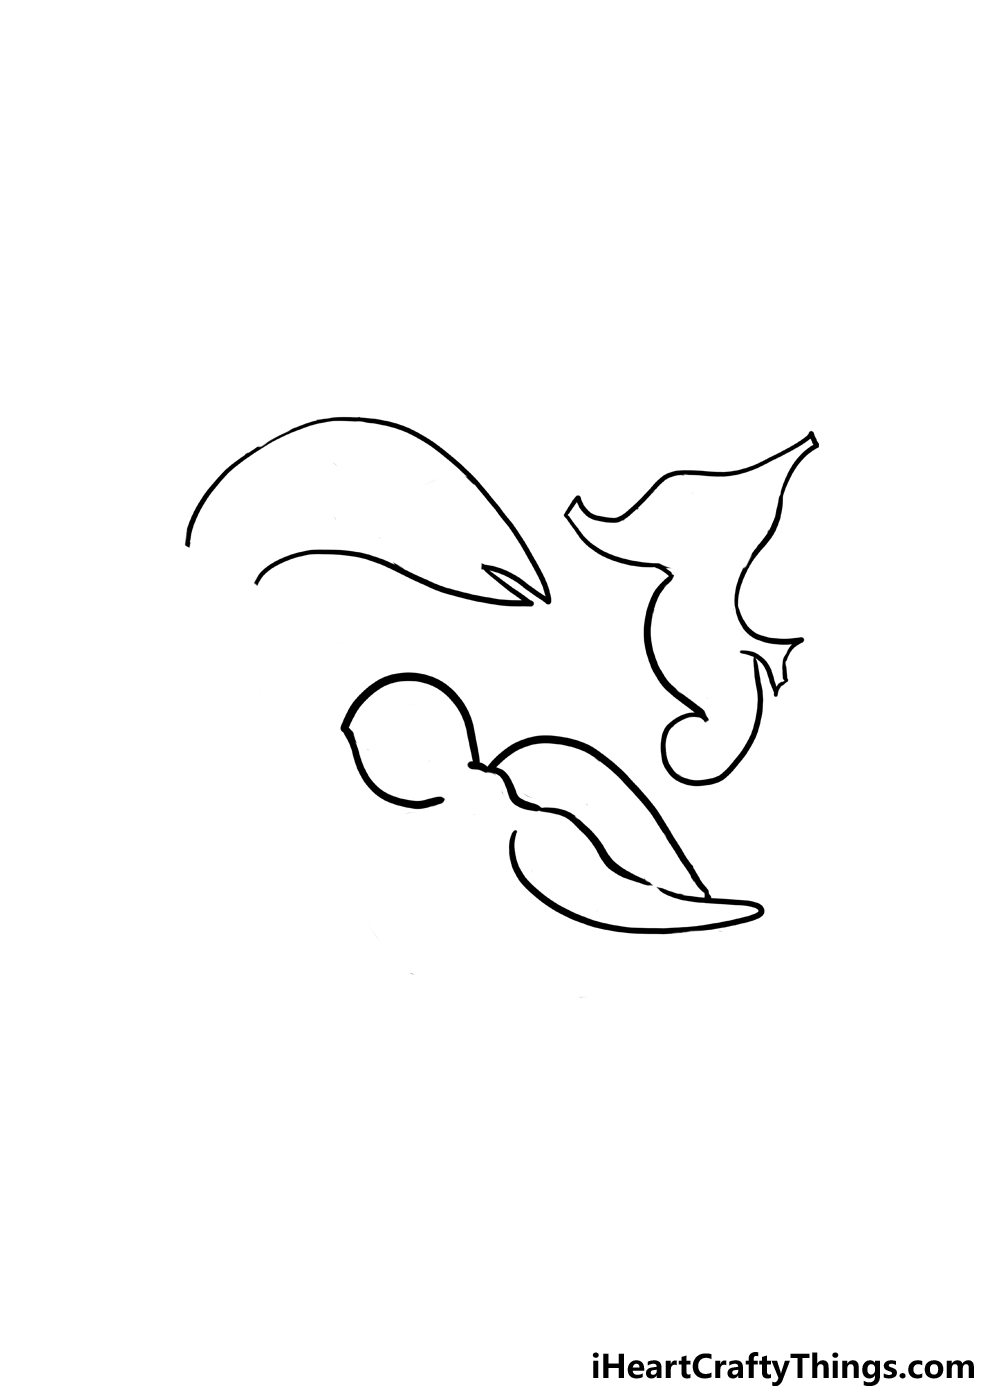 How to Draw Sea Animals step 3